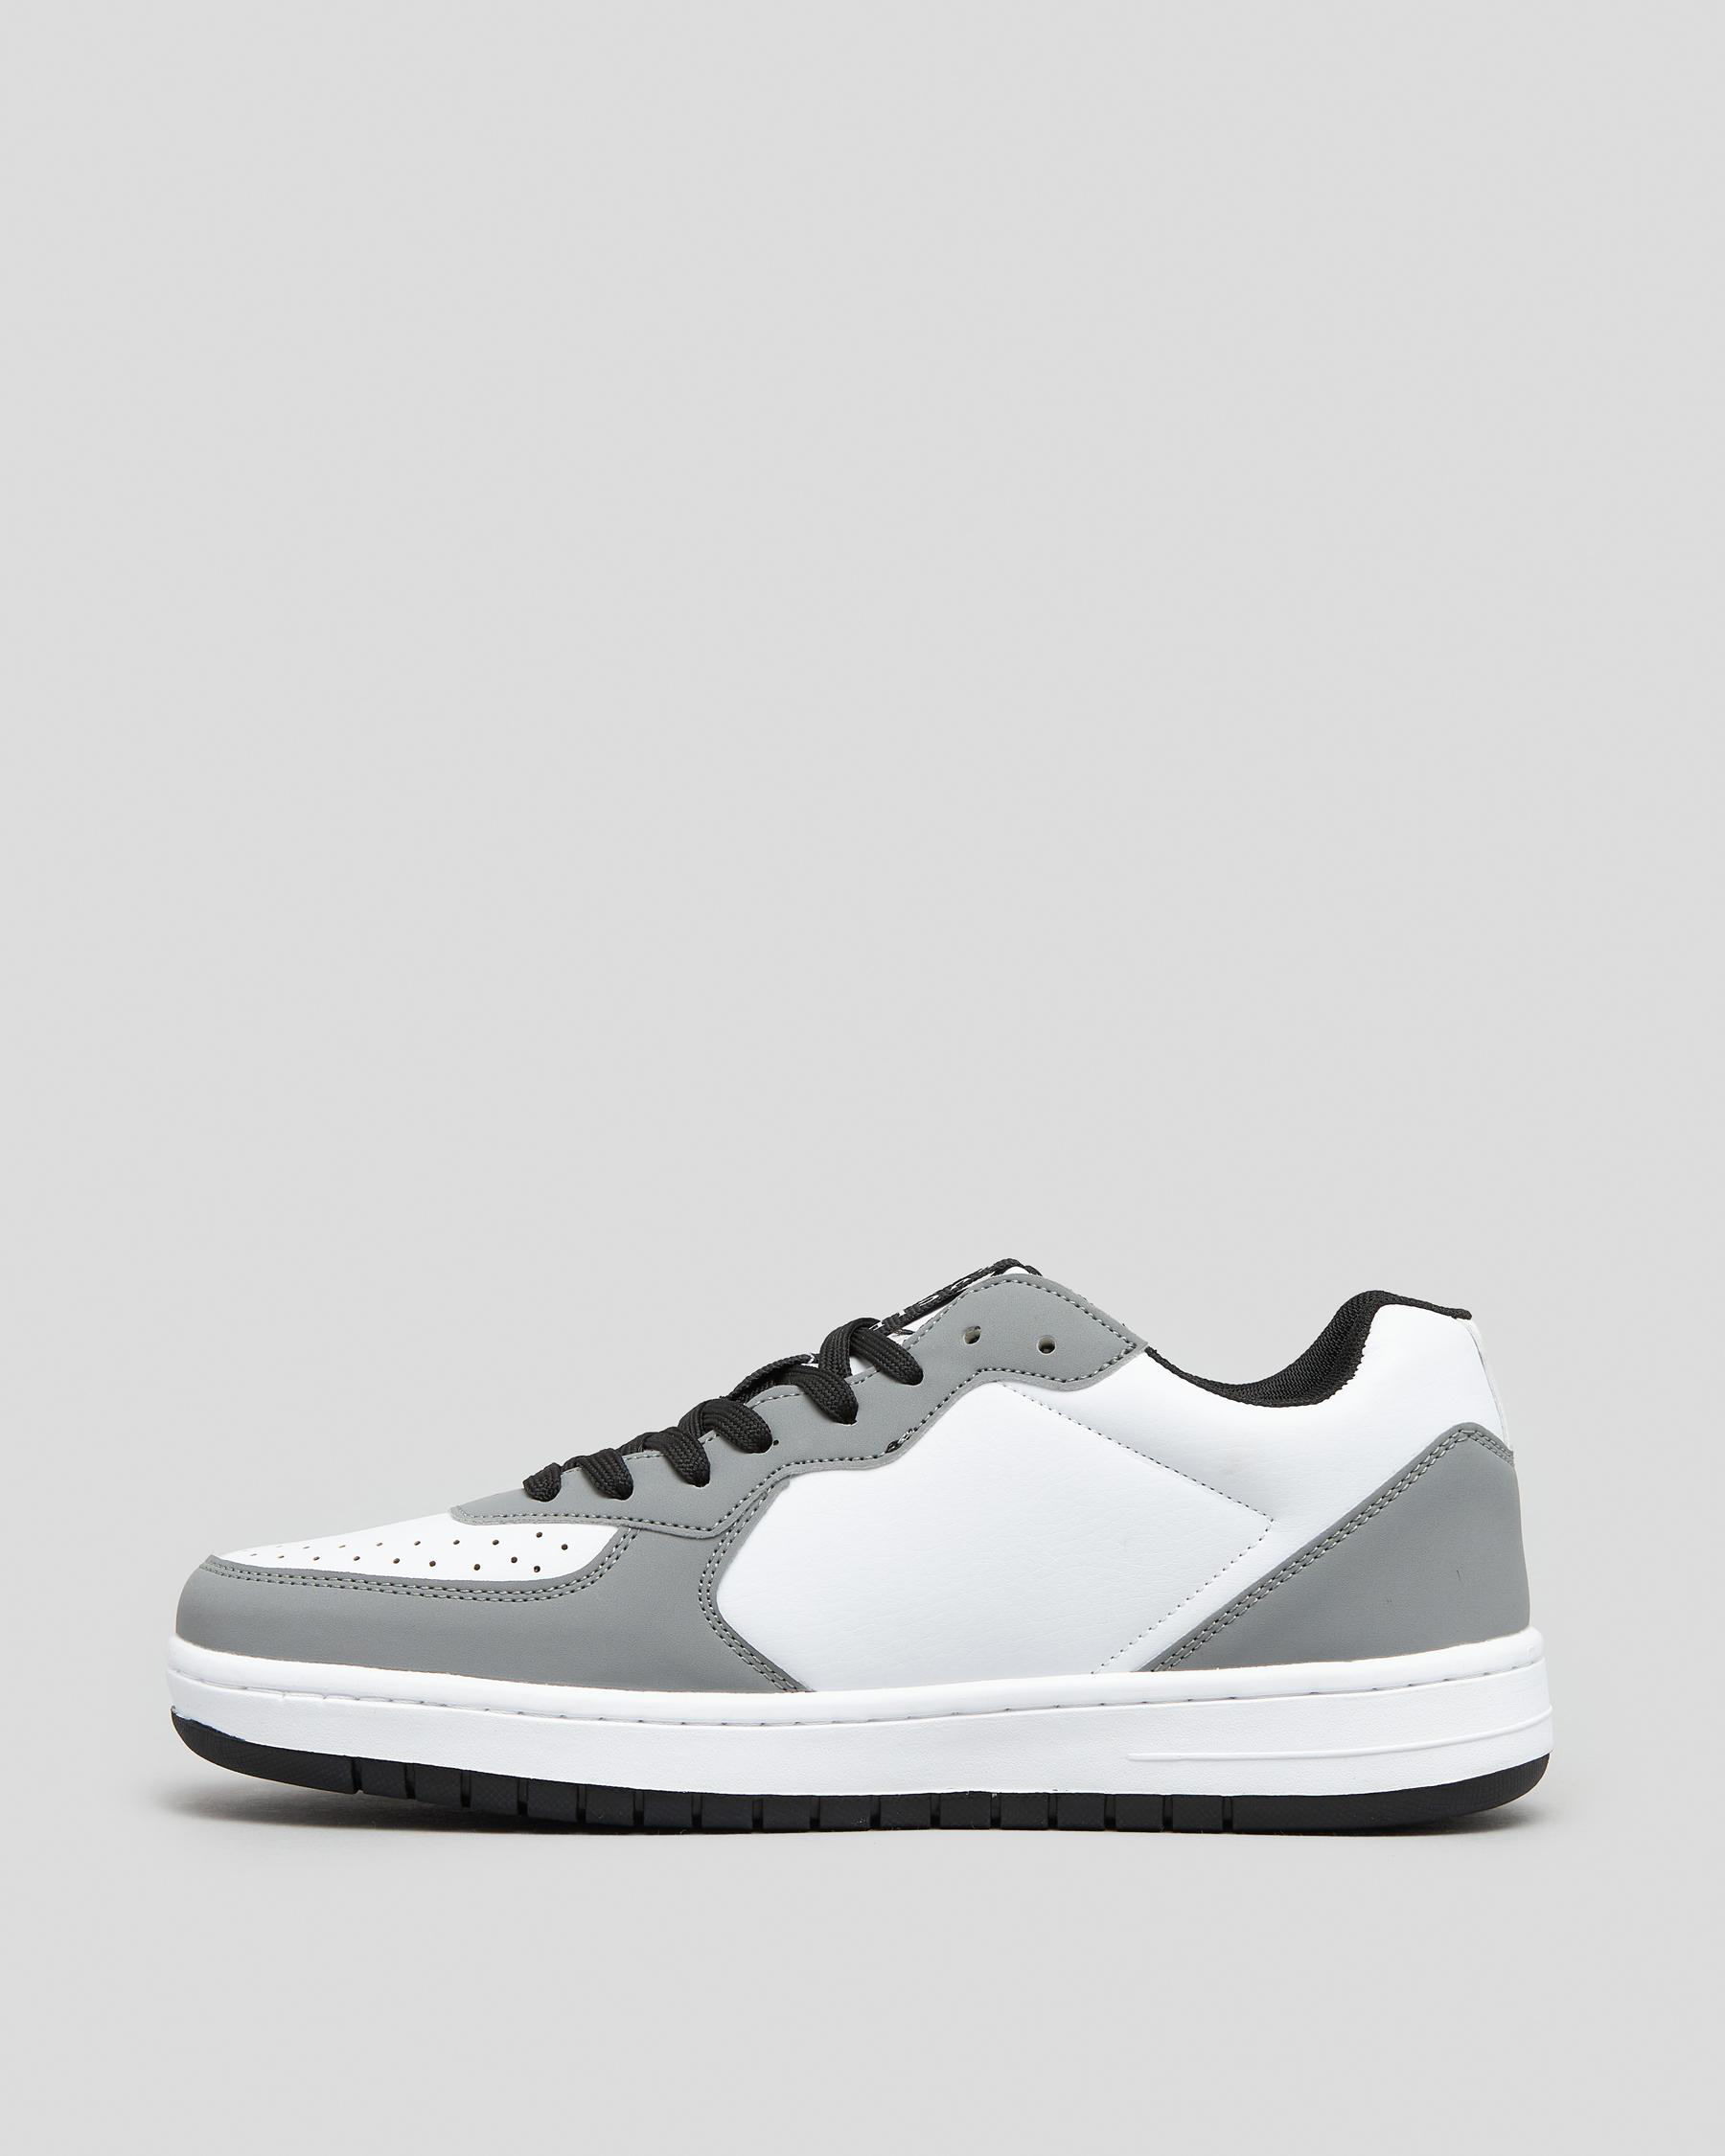 Lucid Alpha Shoes In White/grey/black - Fast Shipping & Easy Returns ...